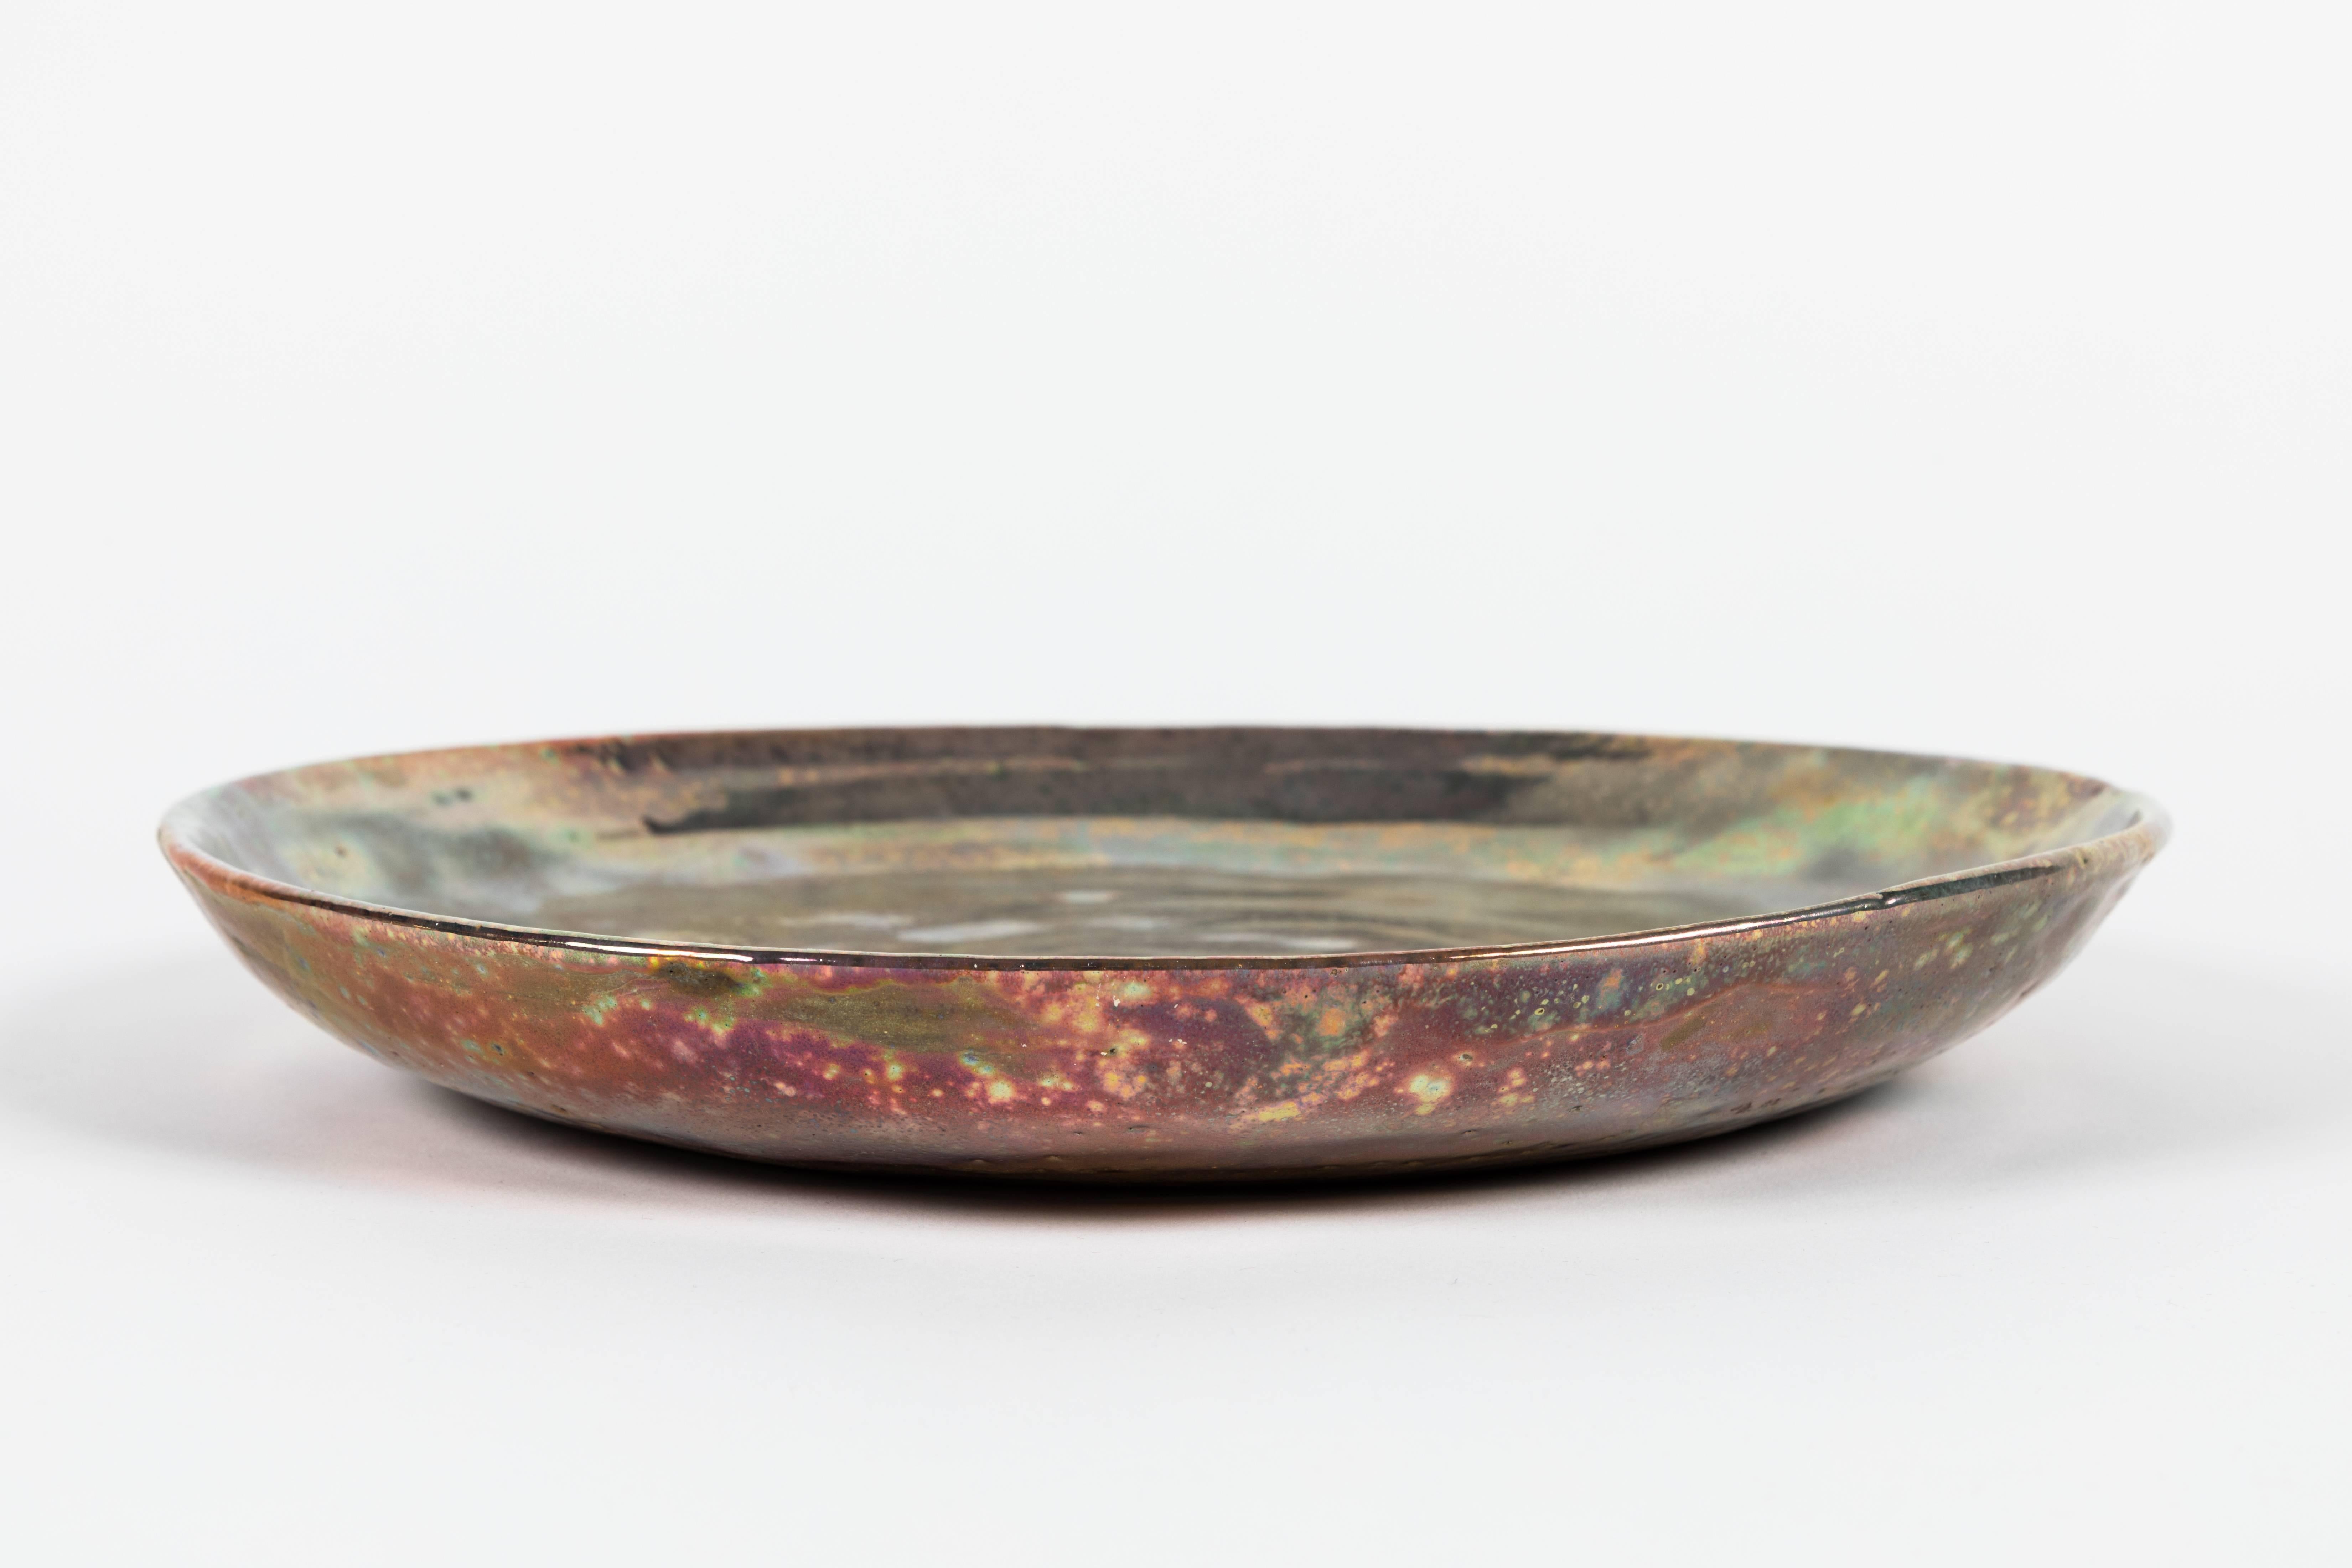 Glazed Beatrice Wood Iridescent Earthenware Charger